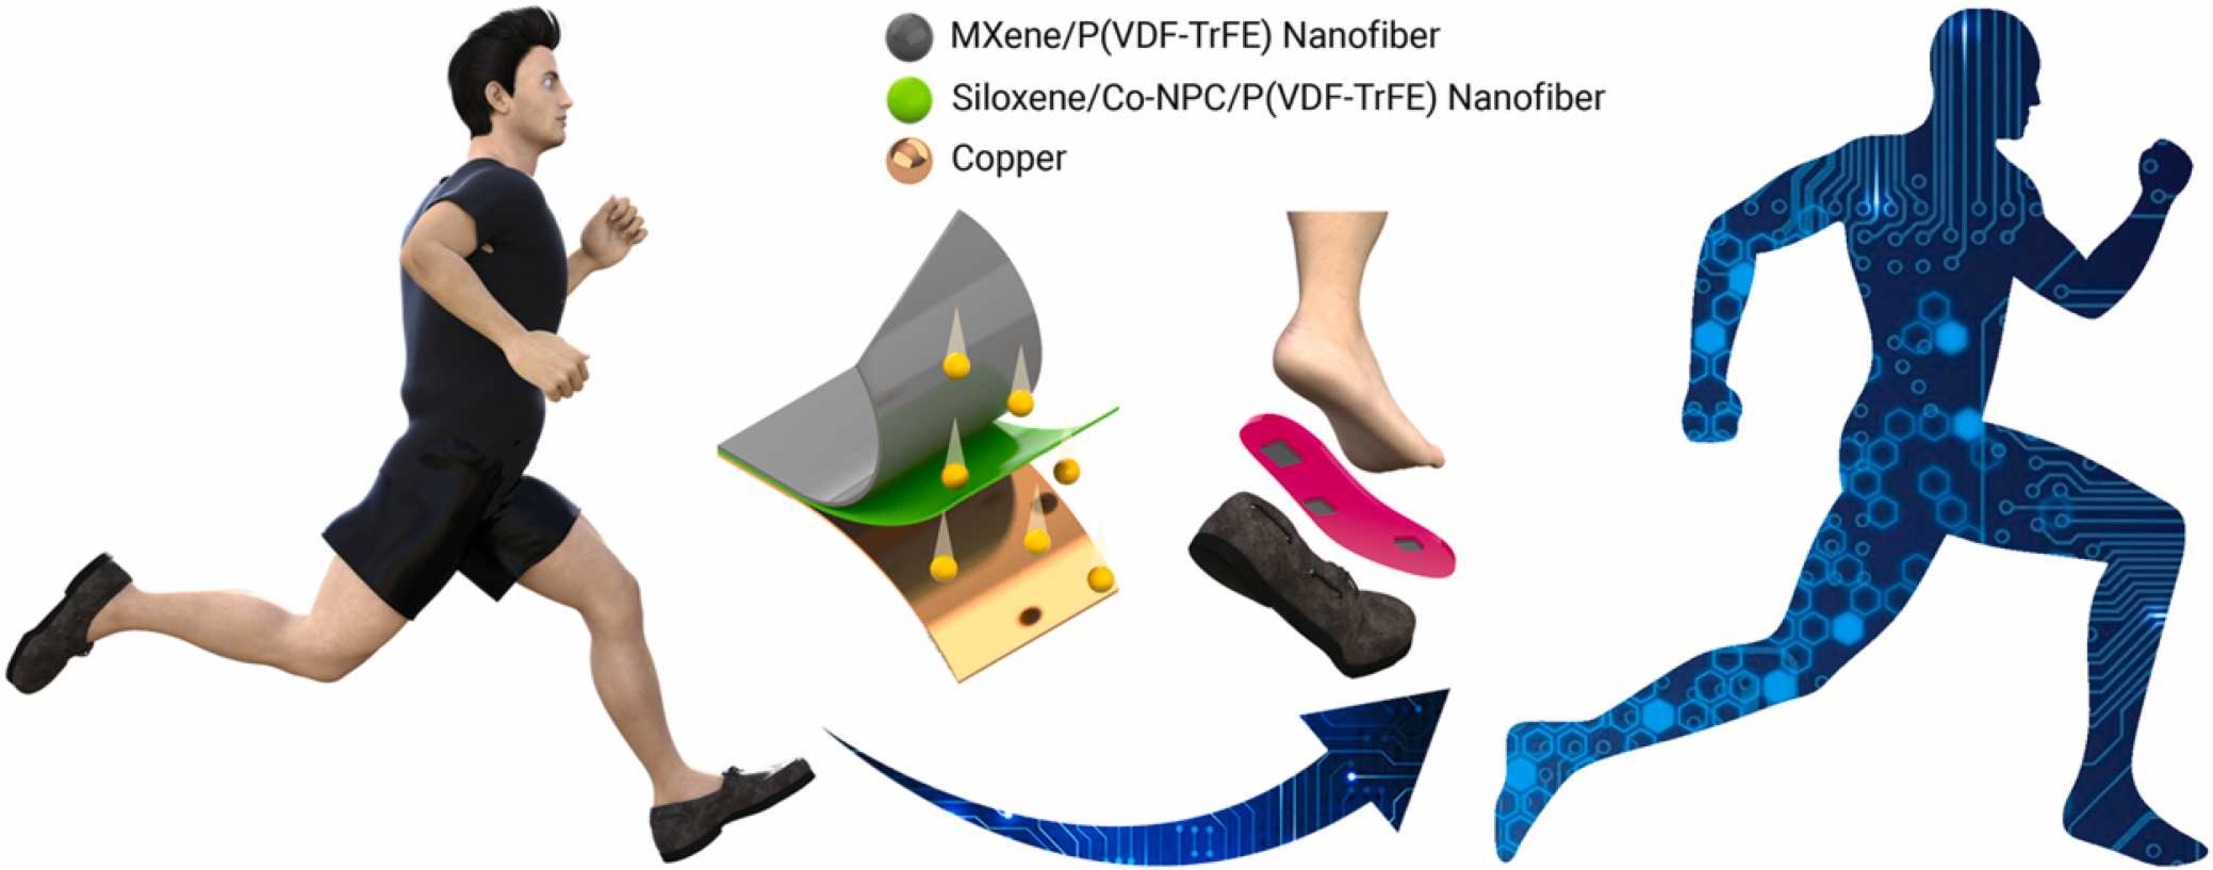 Intermediate nanofibrous charge trapping layer-based wearable triboelectric self-powered sensor for human activity recognition and user identification